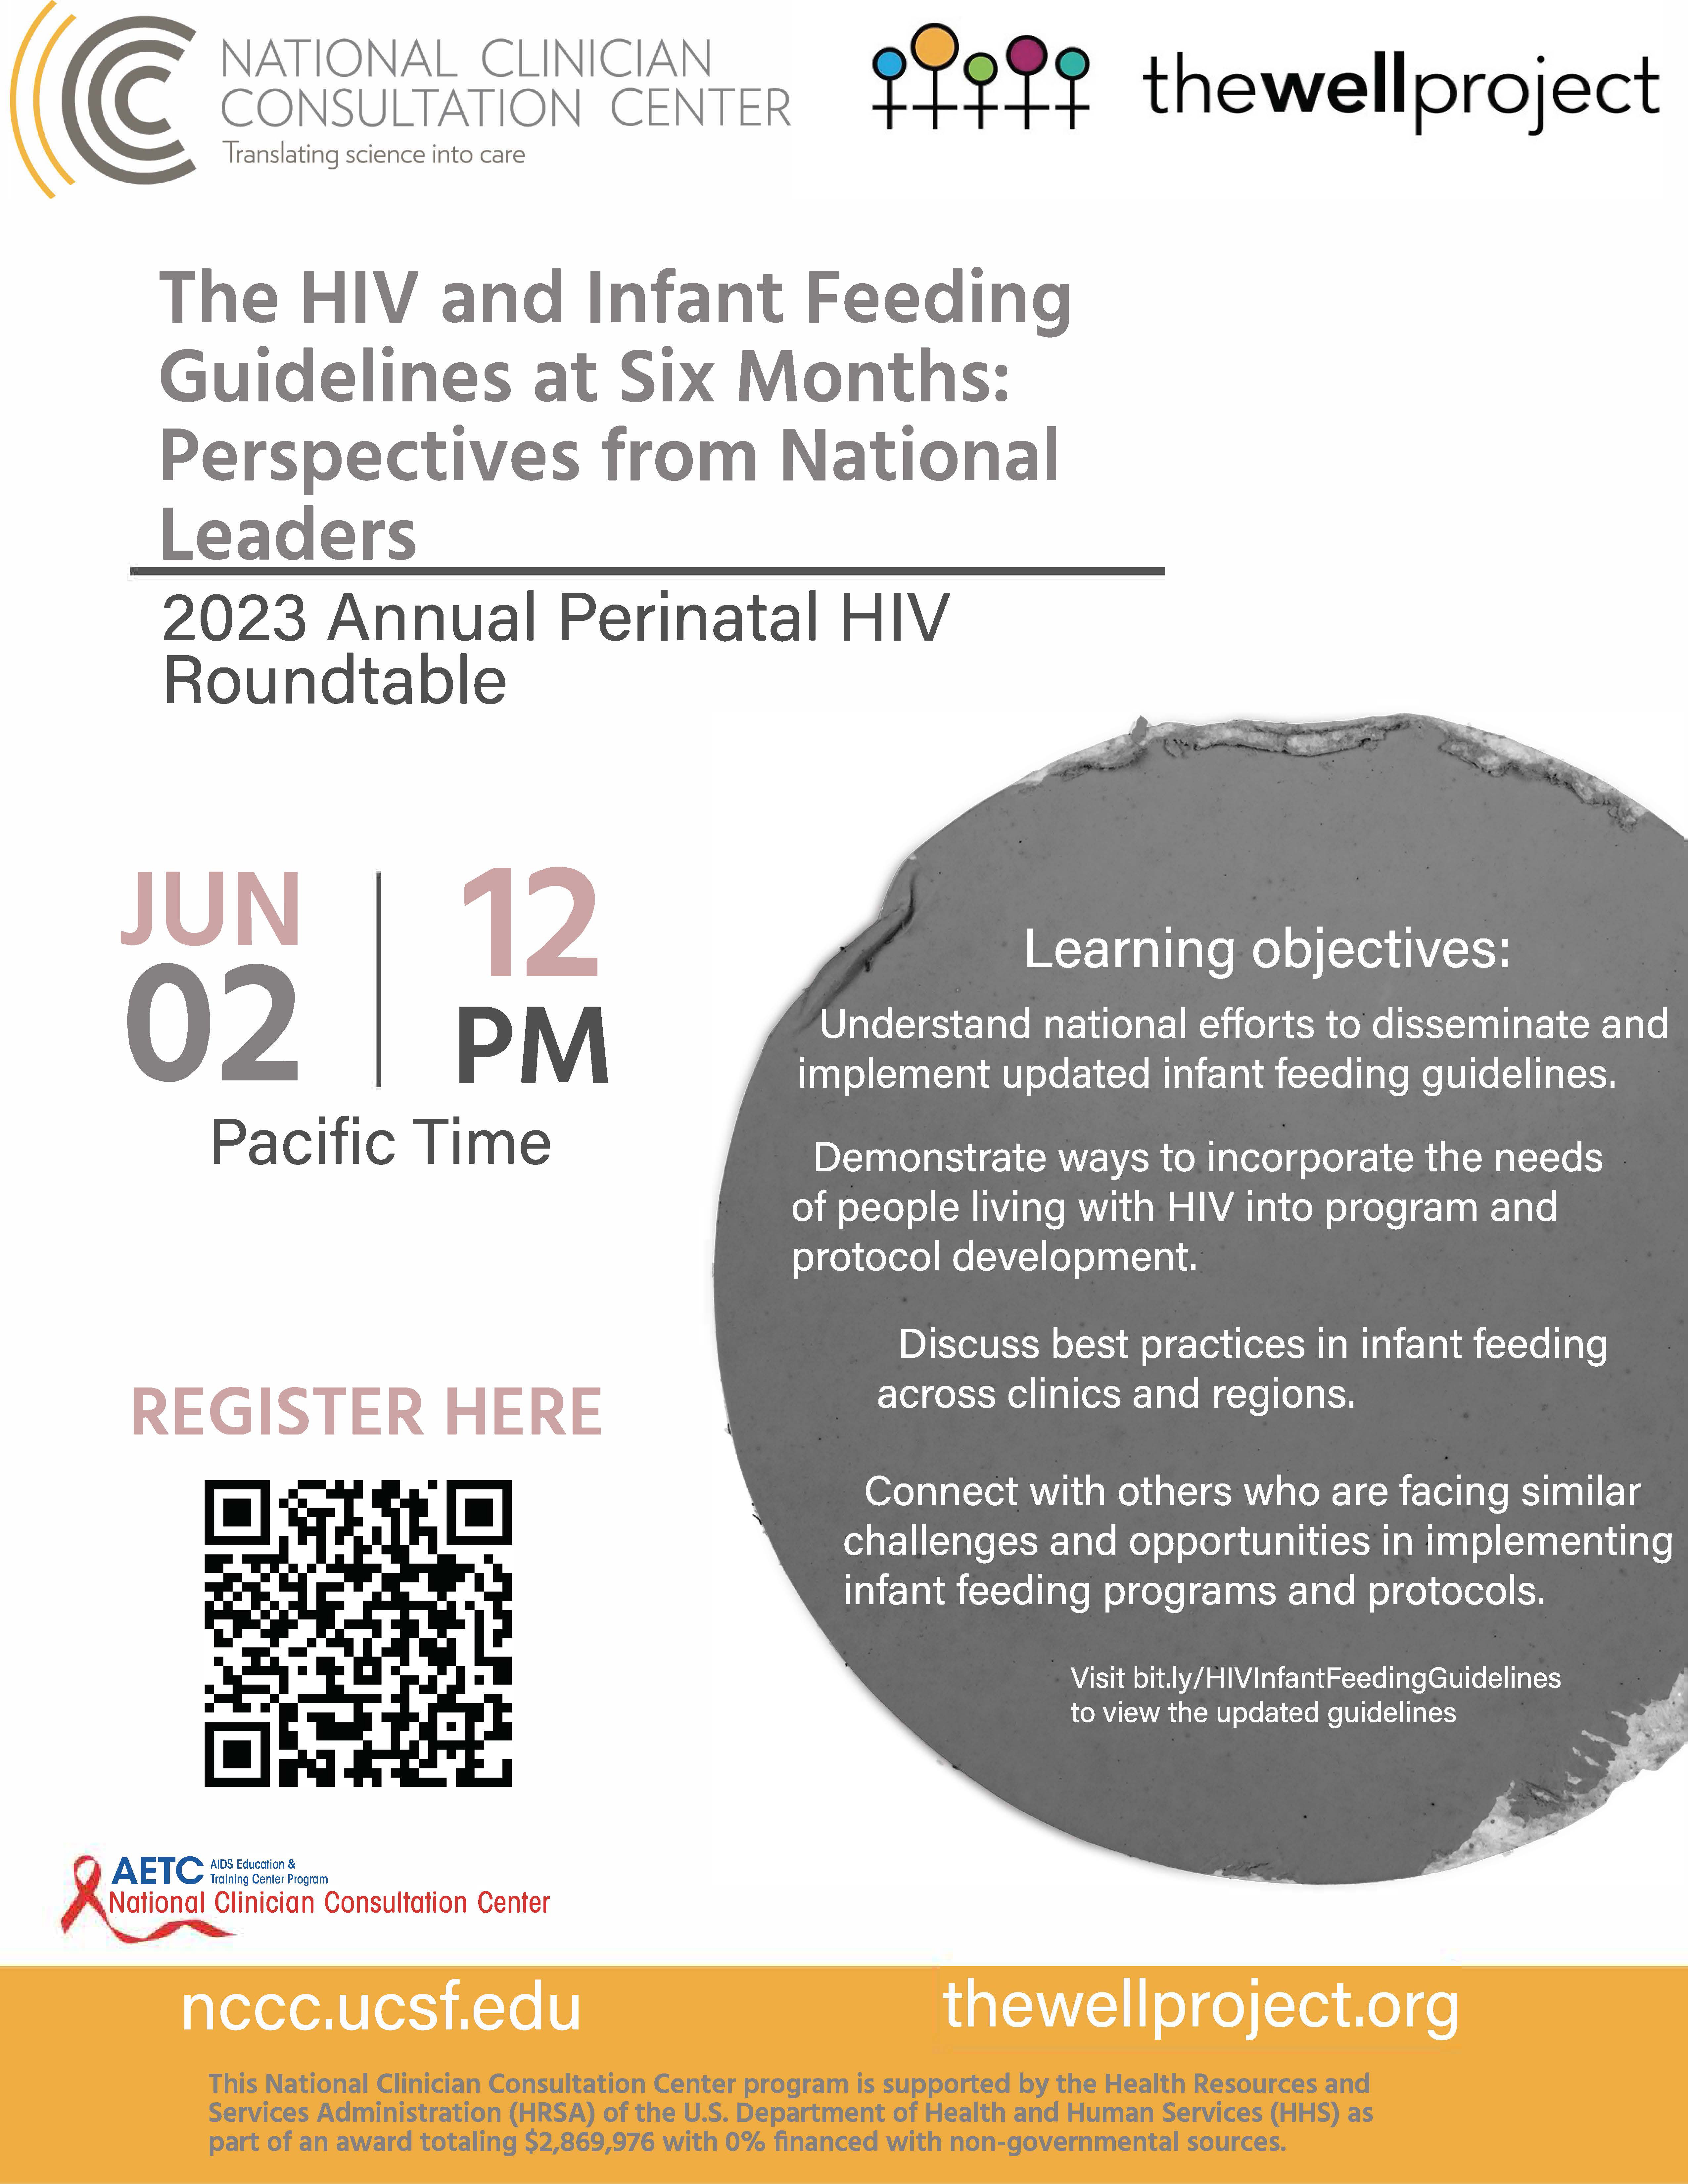 Details for the 2023 Perinatal HIV Roundtable event.